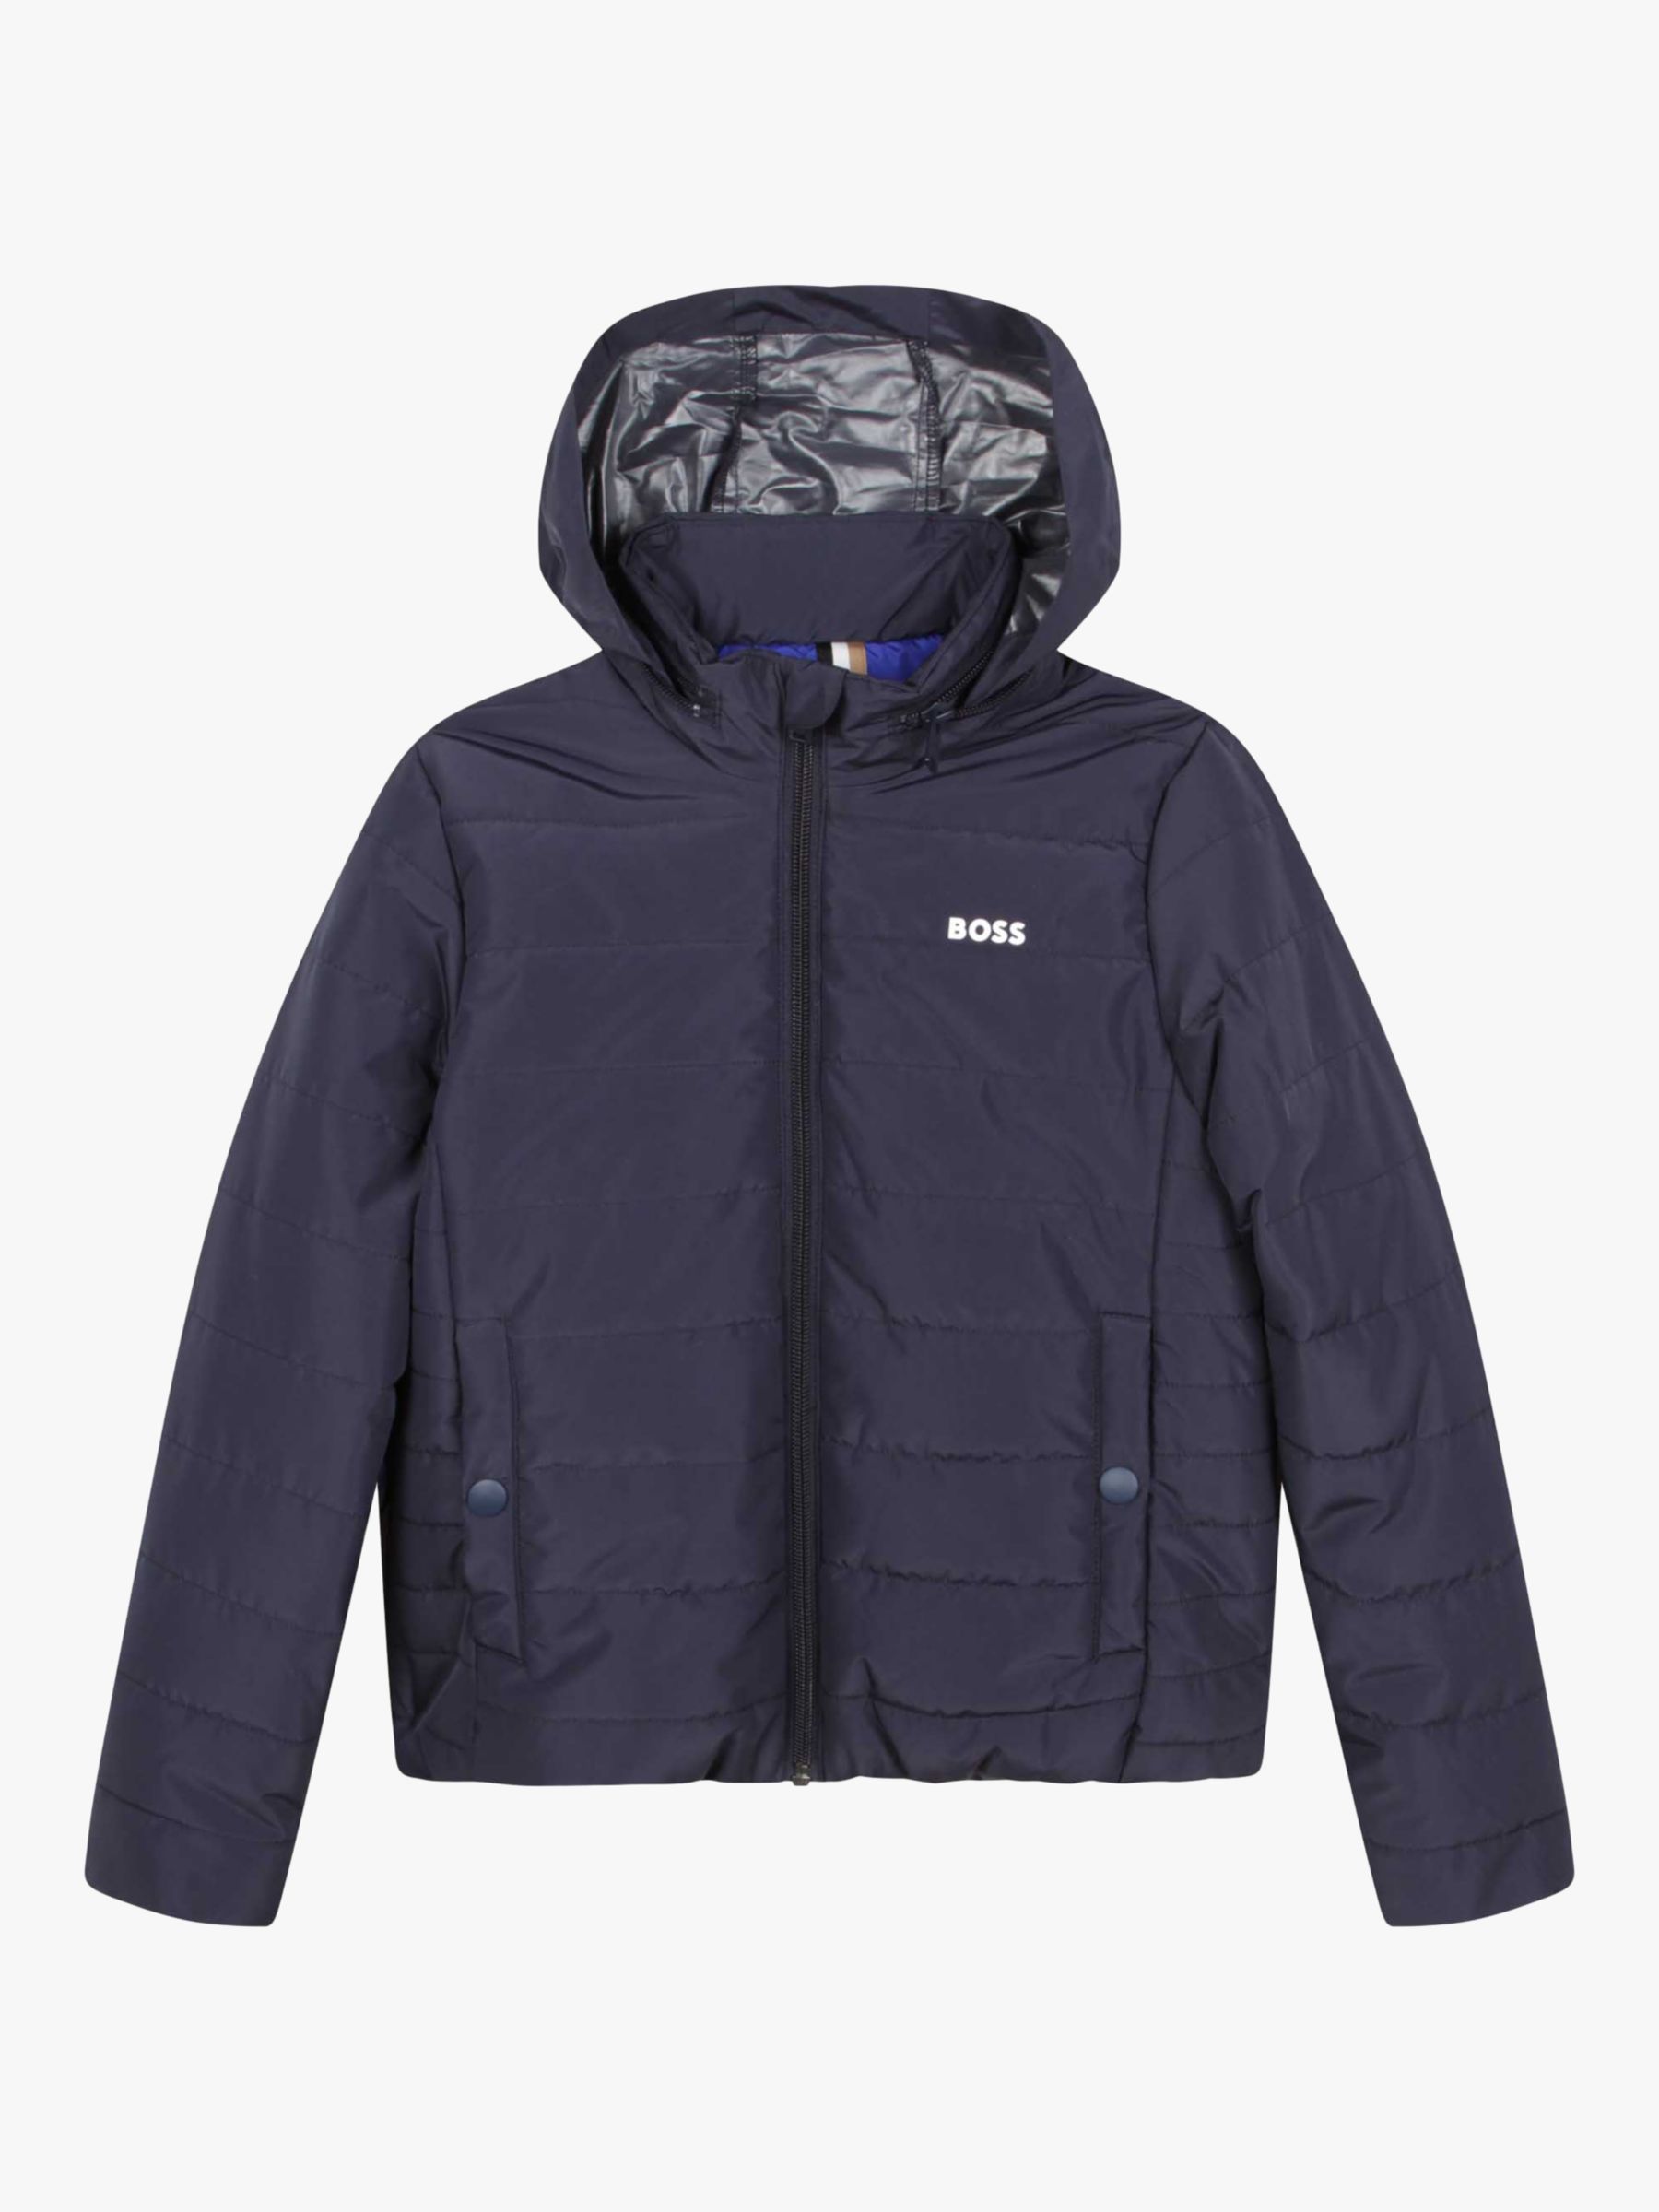 BOSS Kids' Hooded Quilted Jacket, Navy at John Lewis & Partners